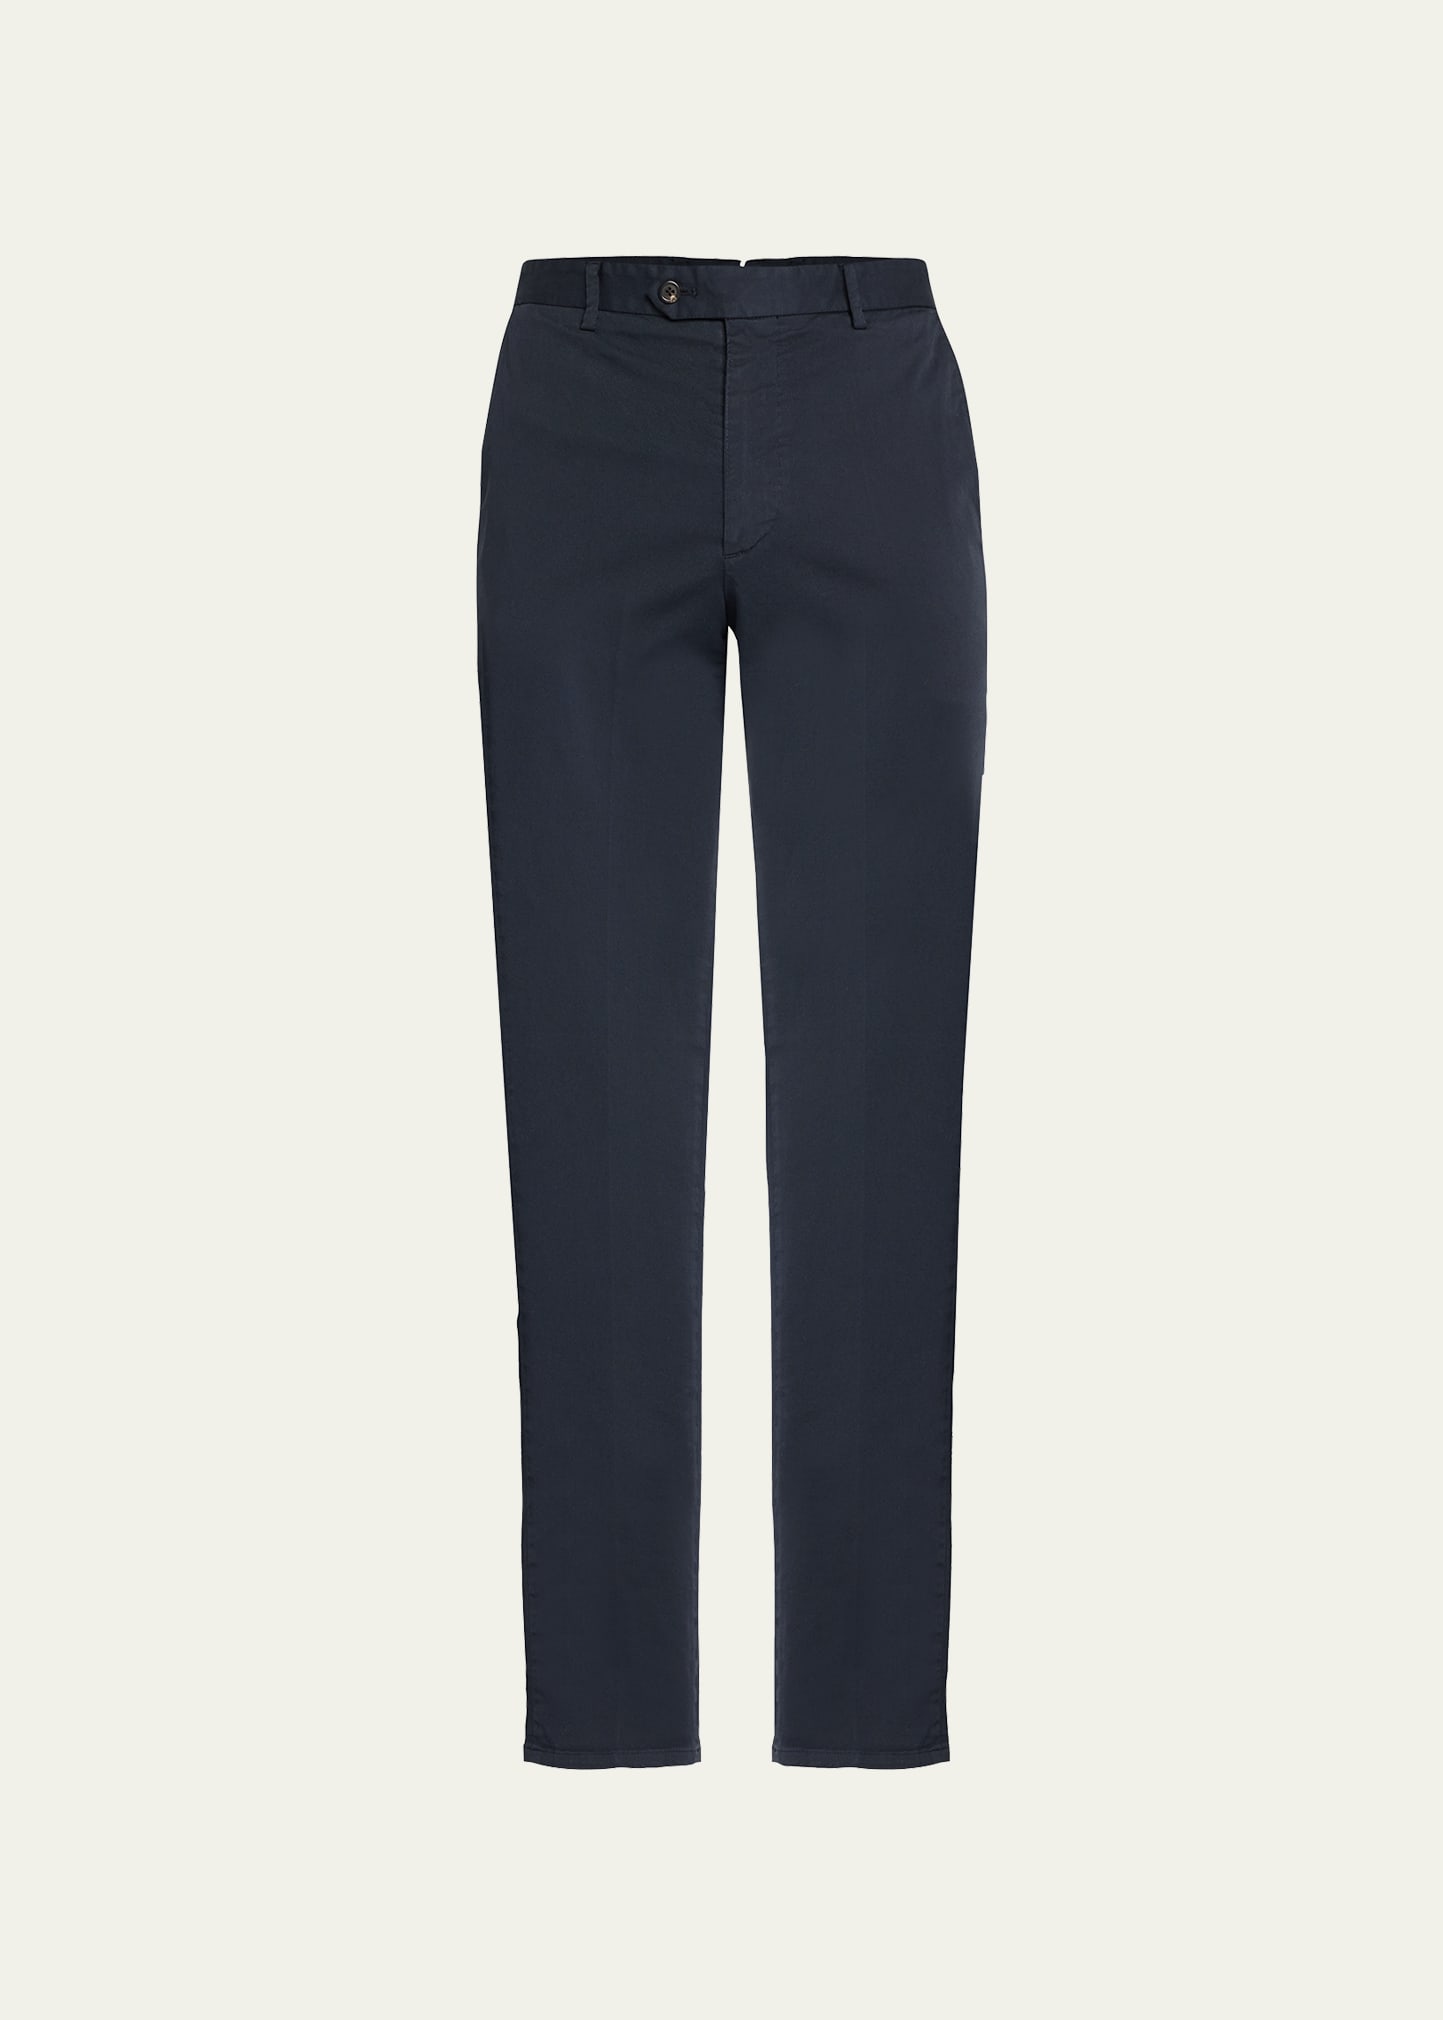 Men's Wellbeck Slim Fit Cotton-Stretch Trousers